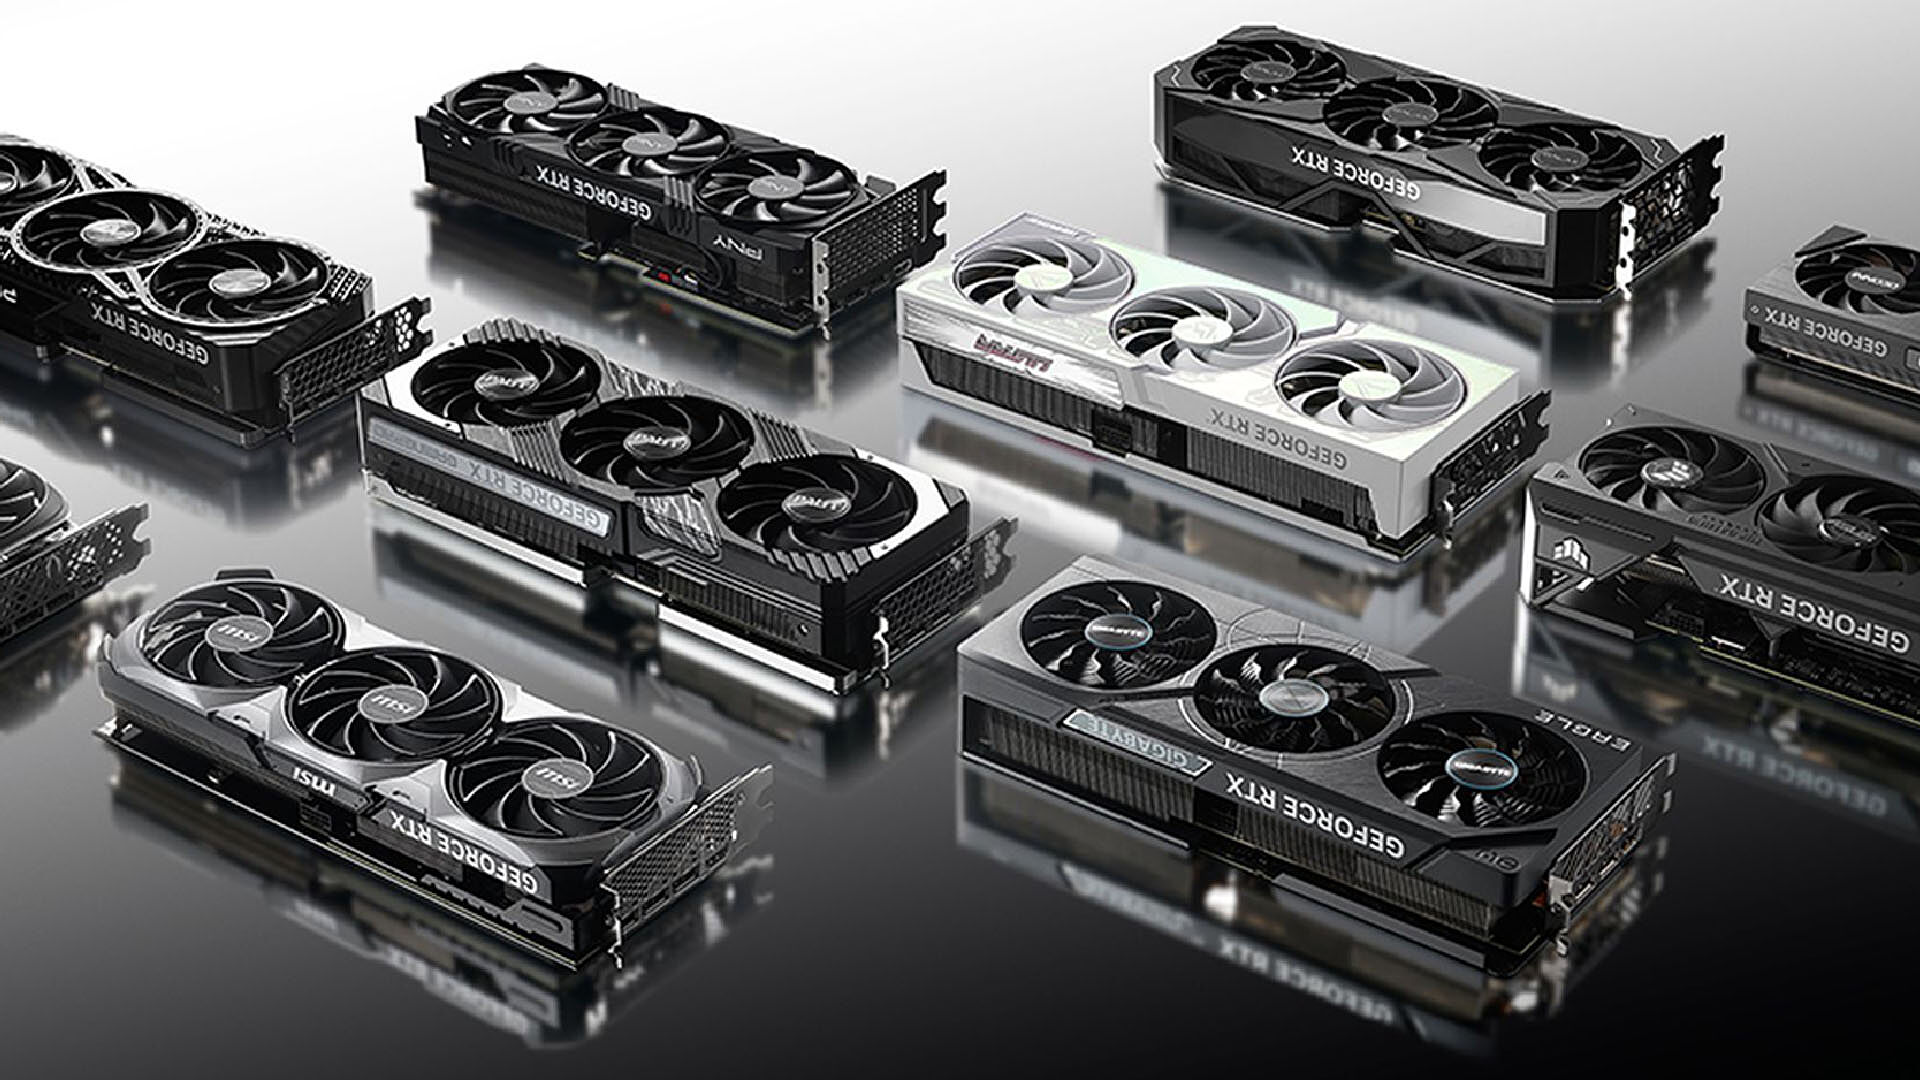 GeForce RTX 4070 Ti graphics card starts selling in Europe - prices start from €899